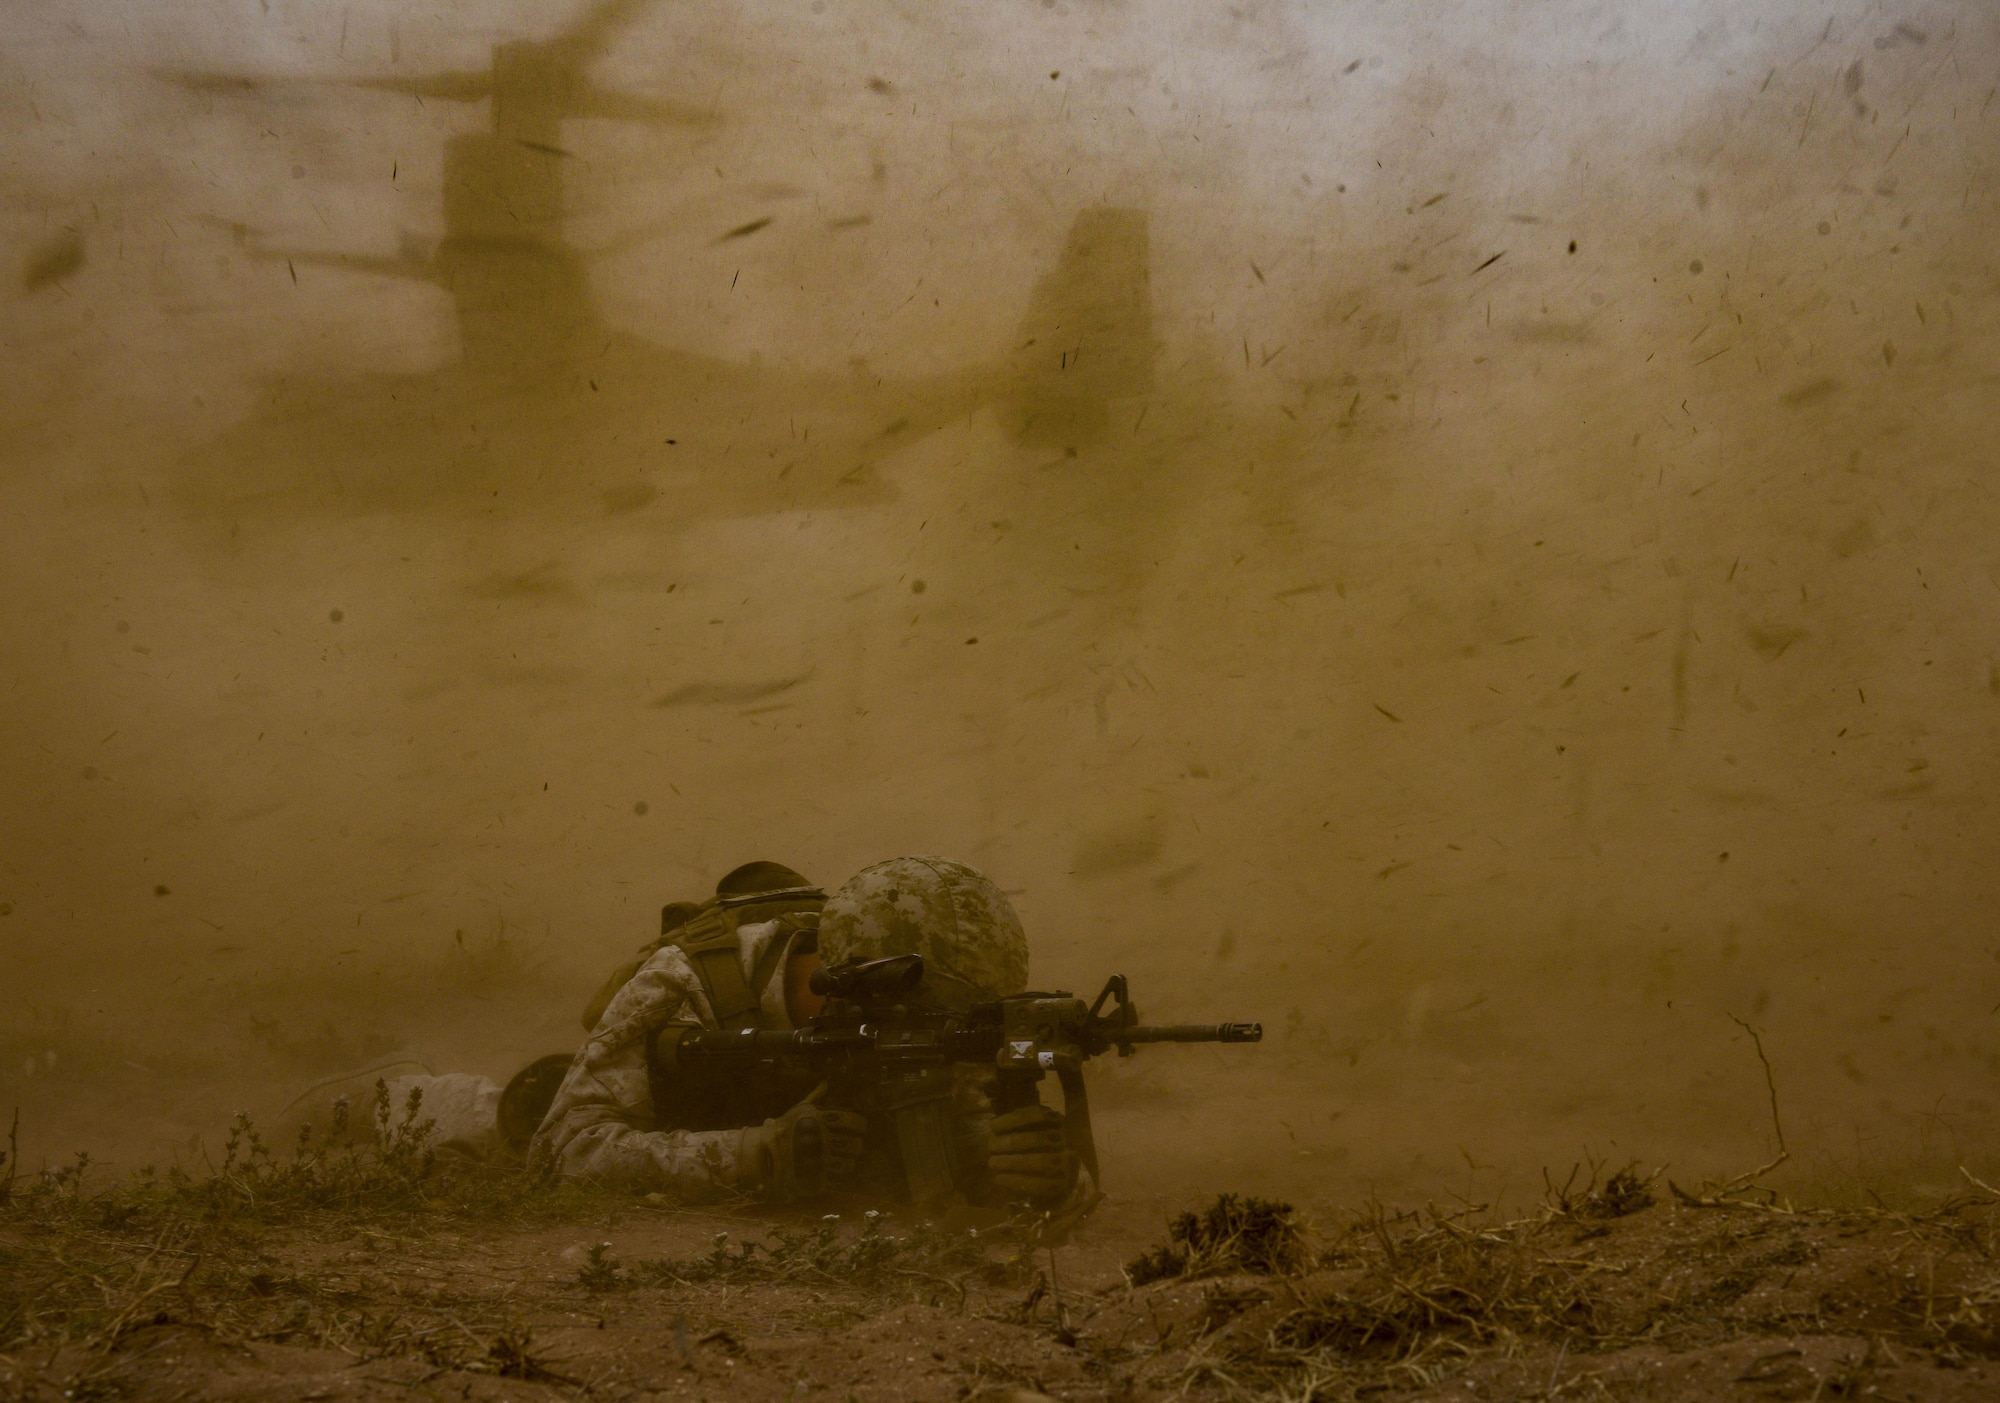 A U.S. Marine provides cover while an MV-22 Osprey departs during a demonstration as part of AFRICAN LION 16 at Tifnit, Kingdom of Morocco, April 26, 2016. 400 U.S. service members joined with over 350 personnel from 10 other countries to create a foundation for future partnerships and provide training to all nations on command post activities and peace support operations. (U.S. Air Force photo by Senior Airman Krystal Ardrey)